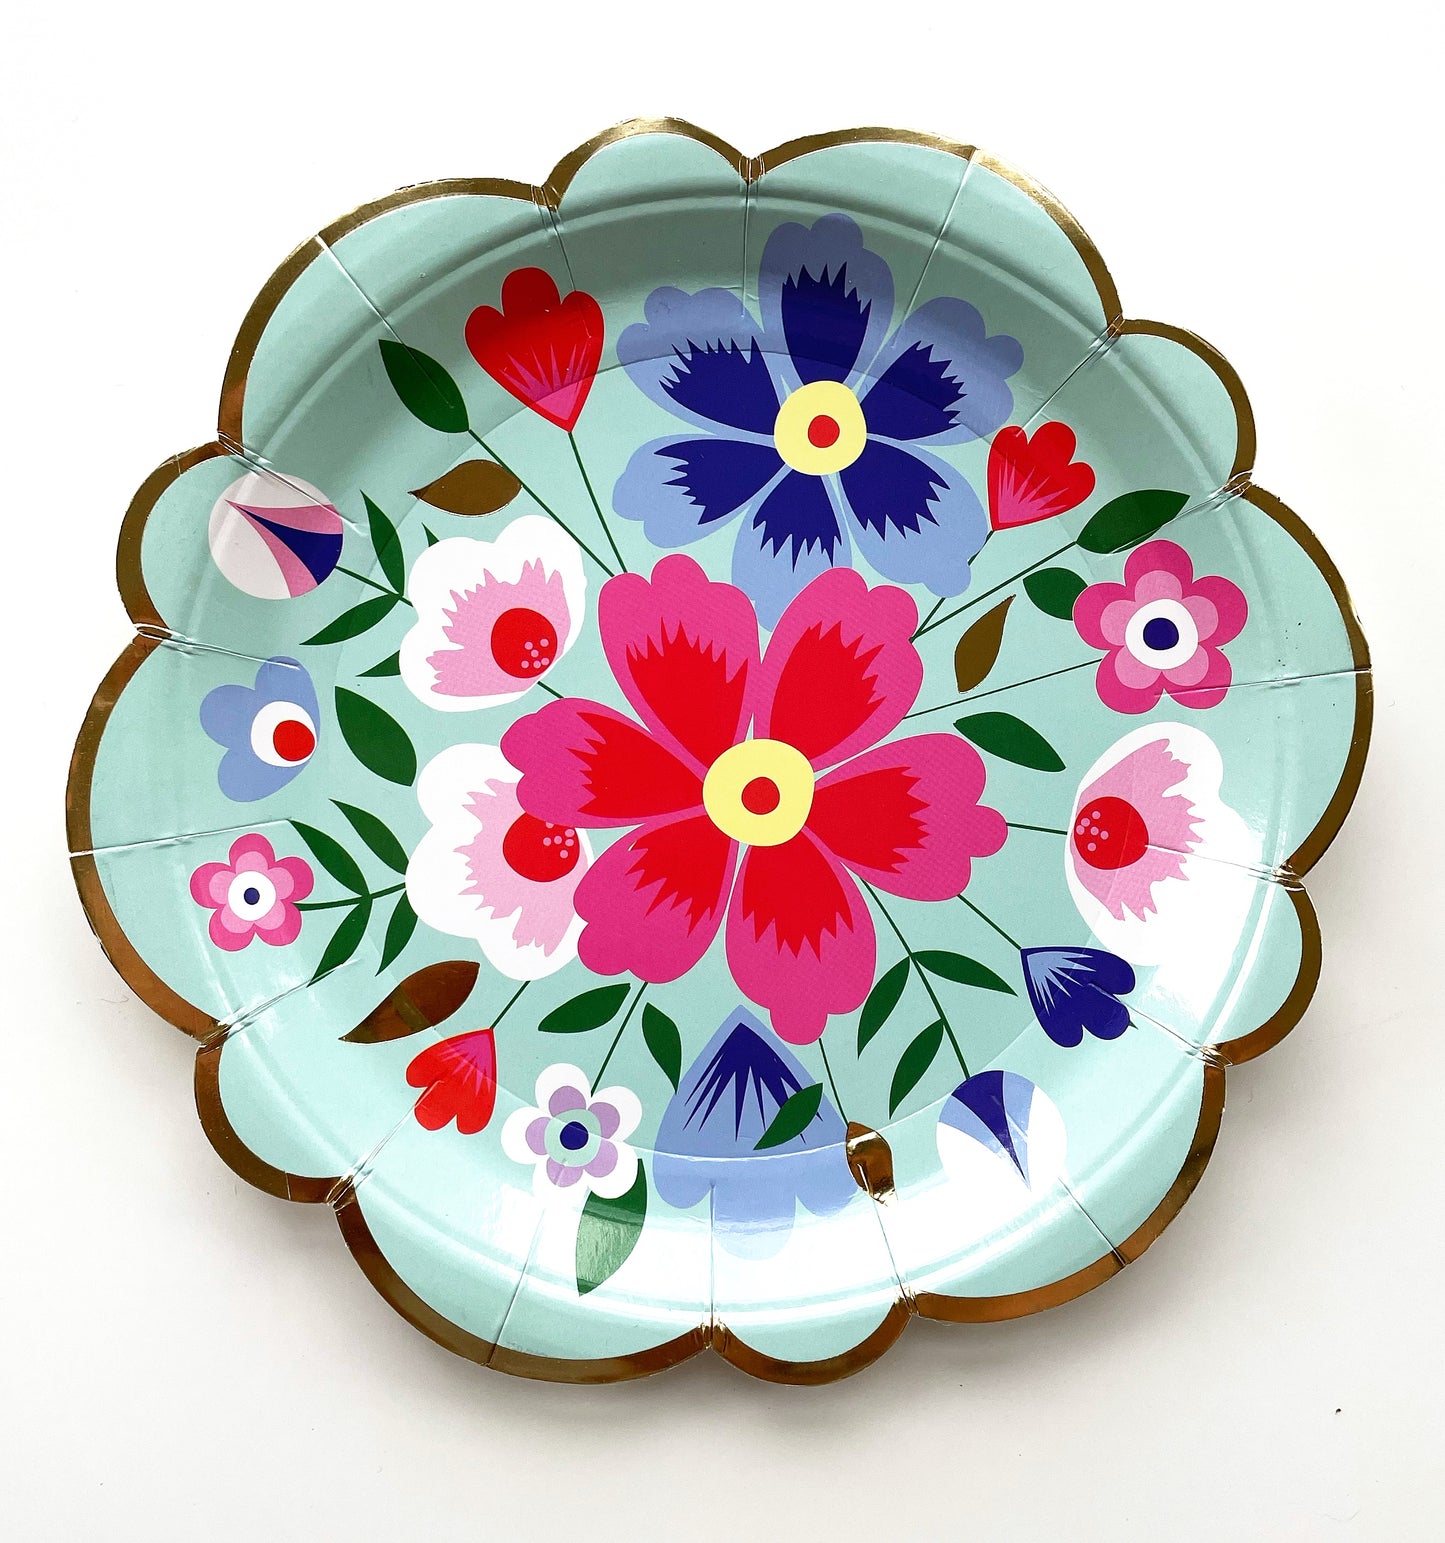 The Blossom Party Kit's paper party plates. The flower/floral pattern includes green, red and blue colours. The party plates have gold scalloped edges.